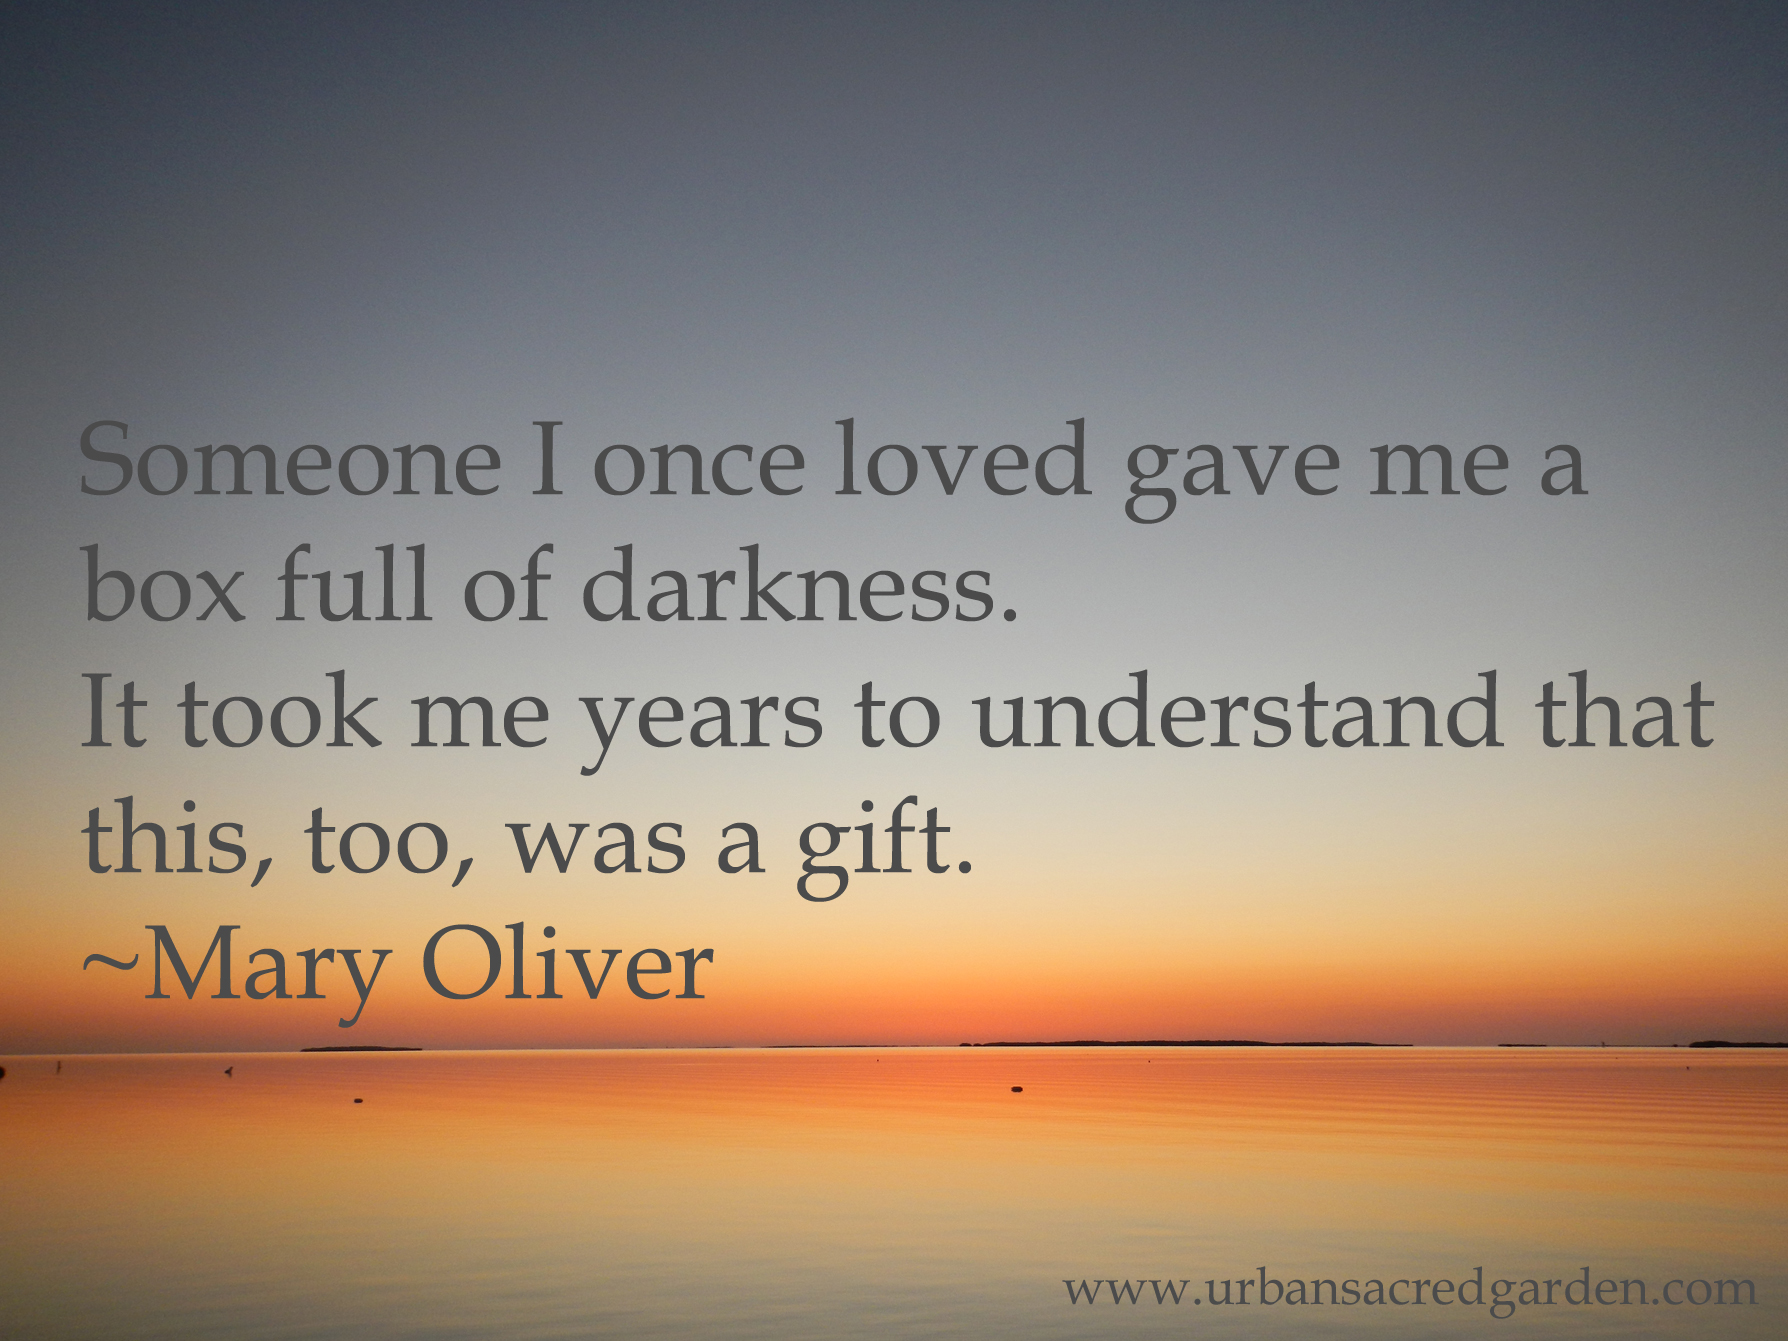 Mary Oliver's quote #1